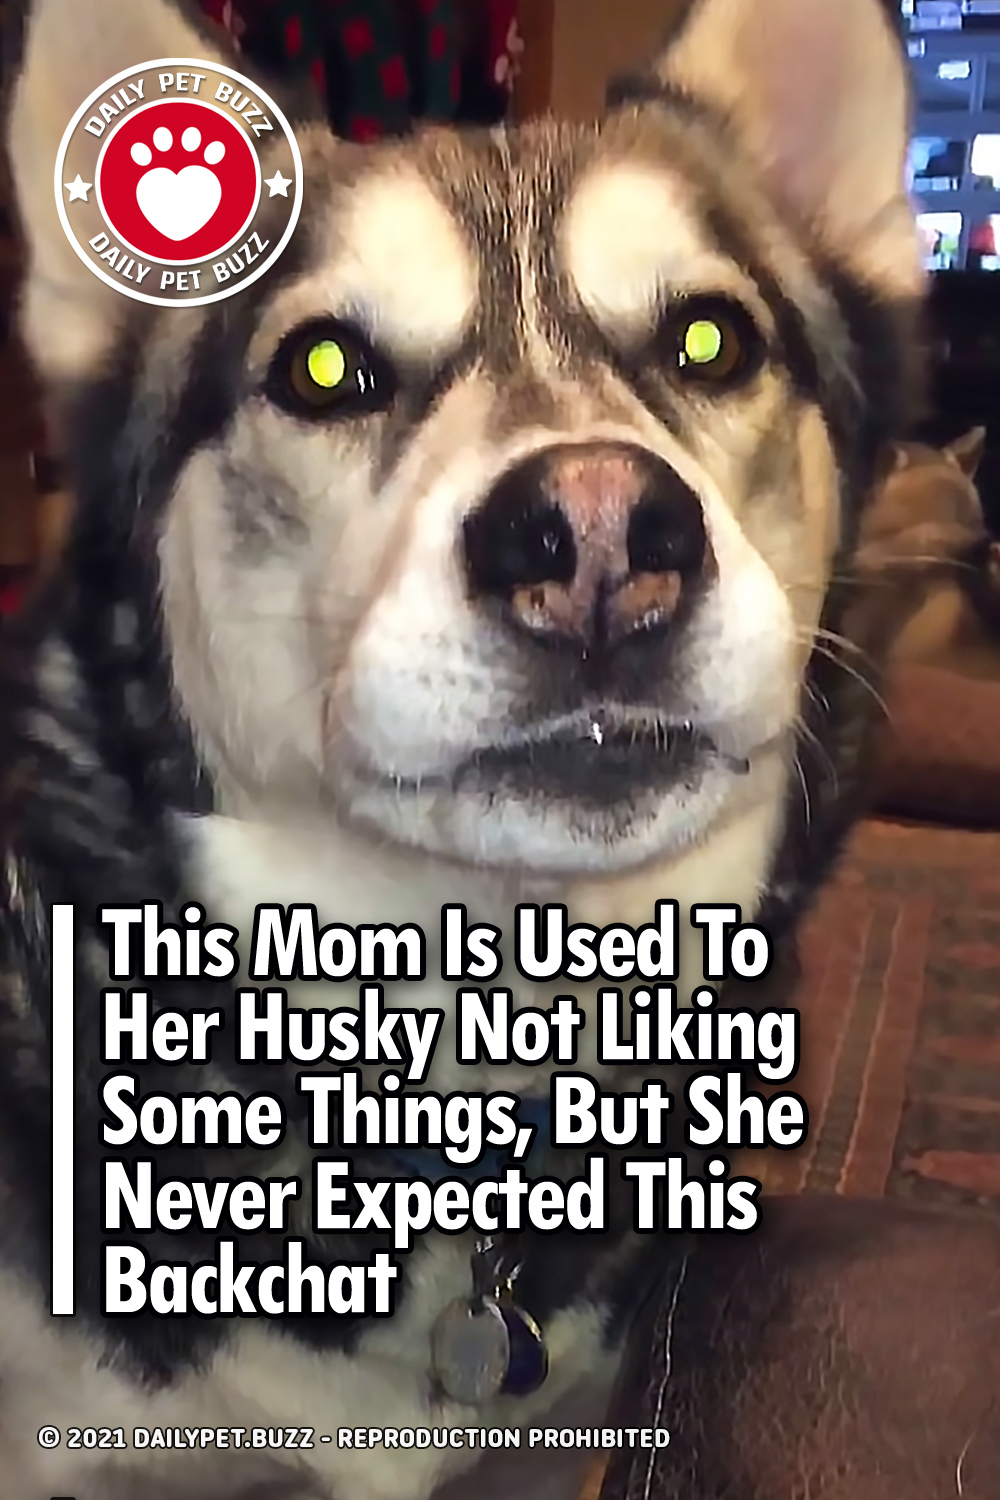 This Mom Is Used To Her Husky Not Liking Some Things, But She Never Expected This Backchat